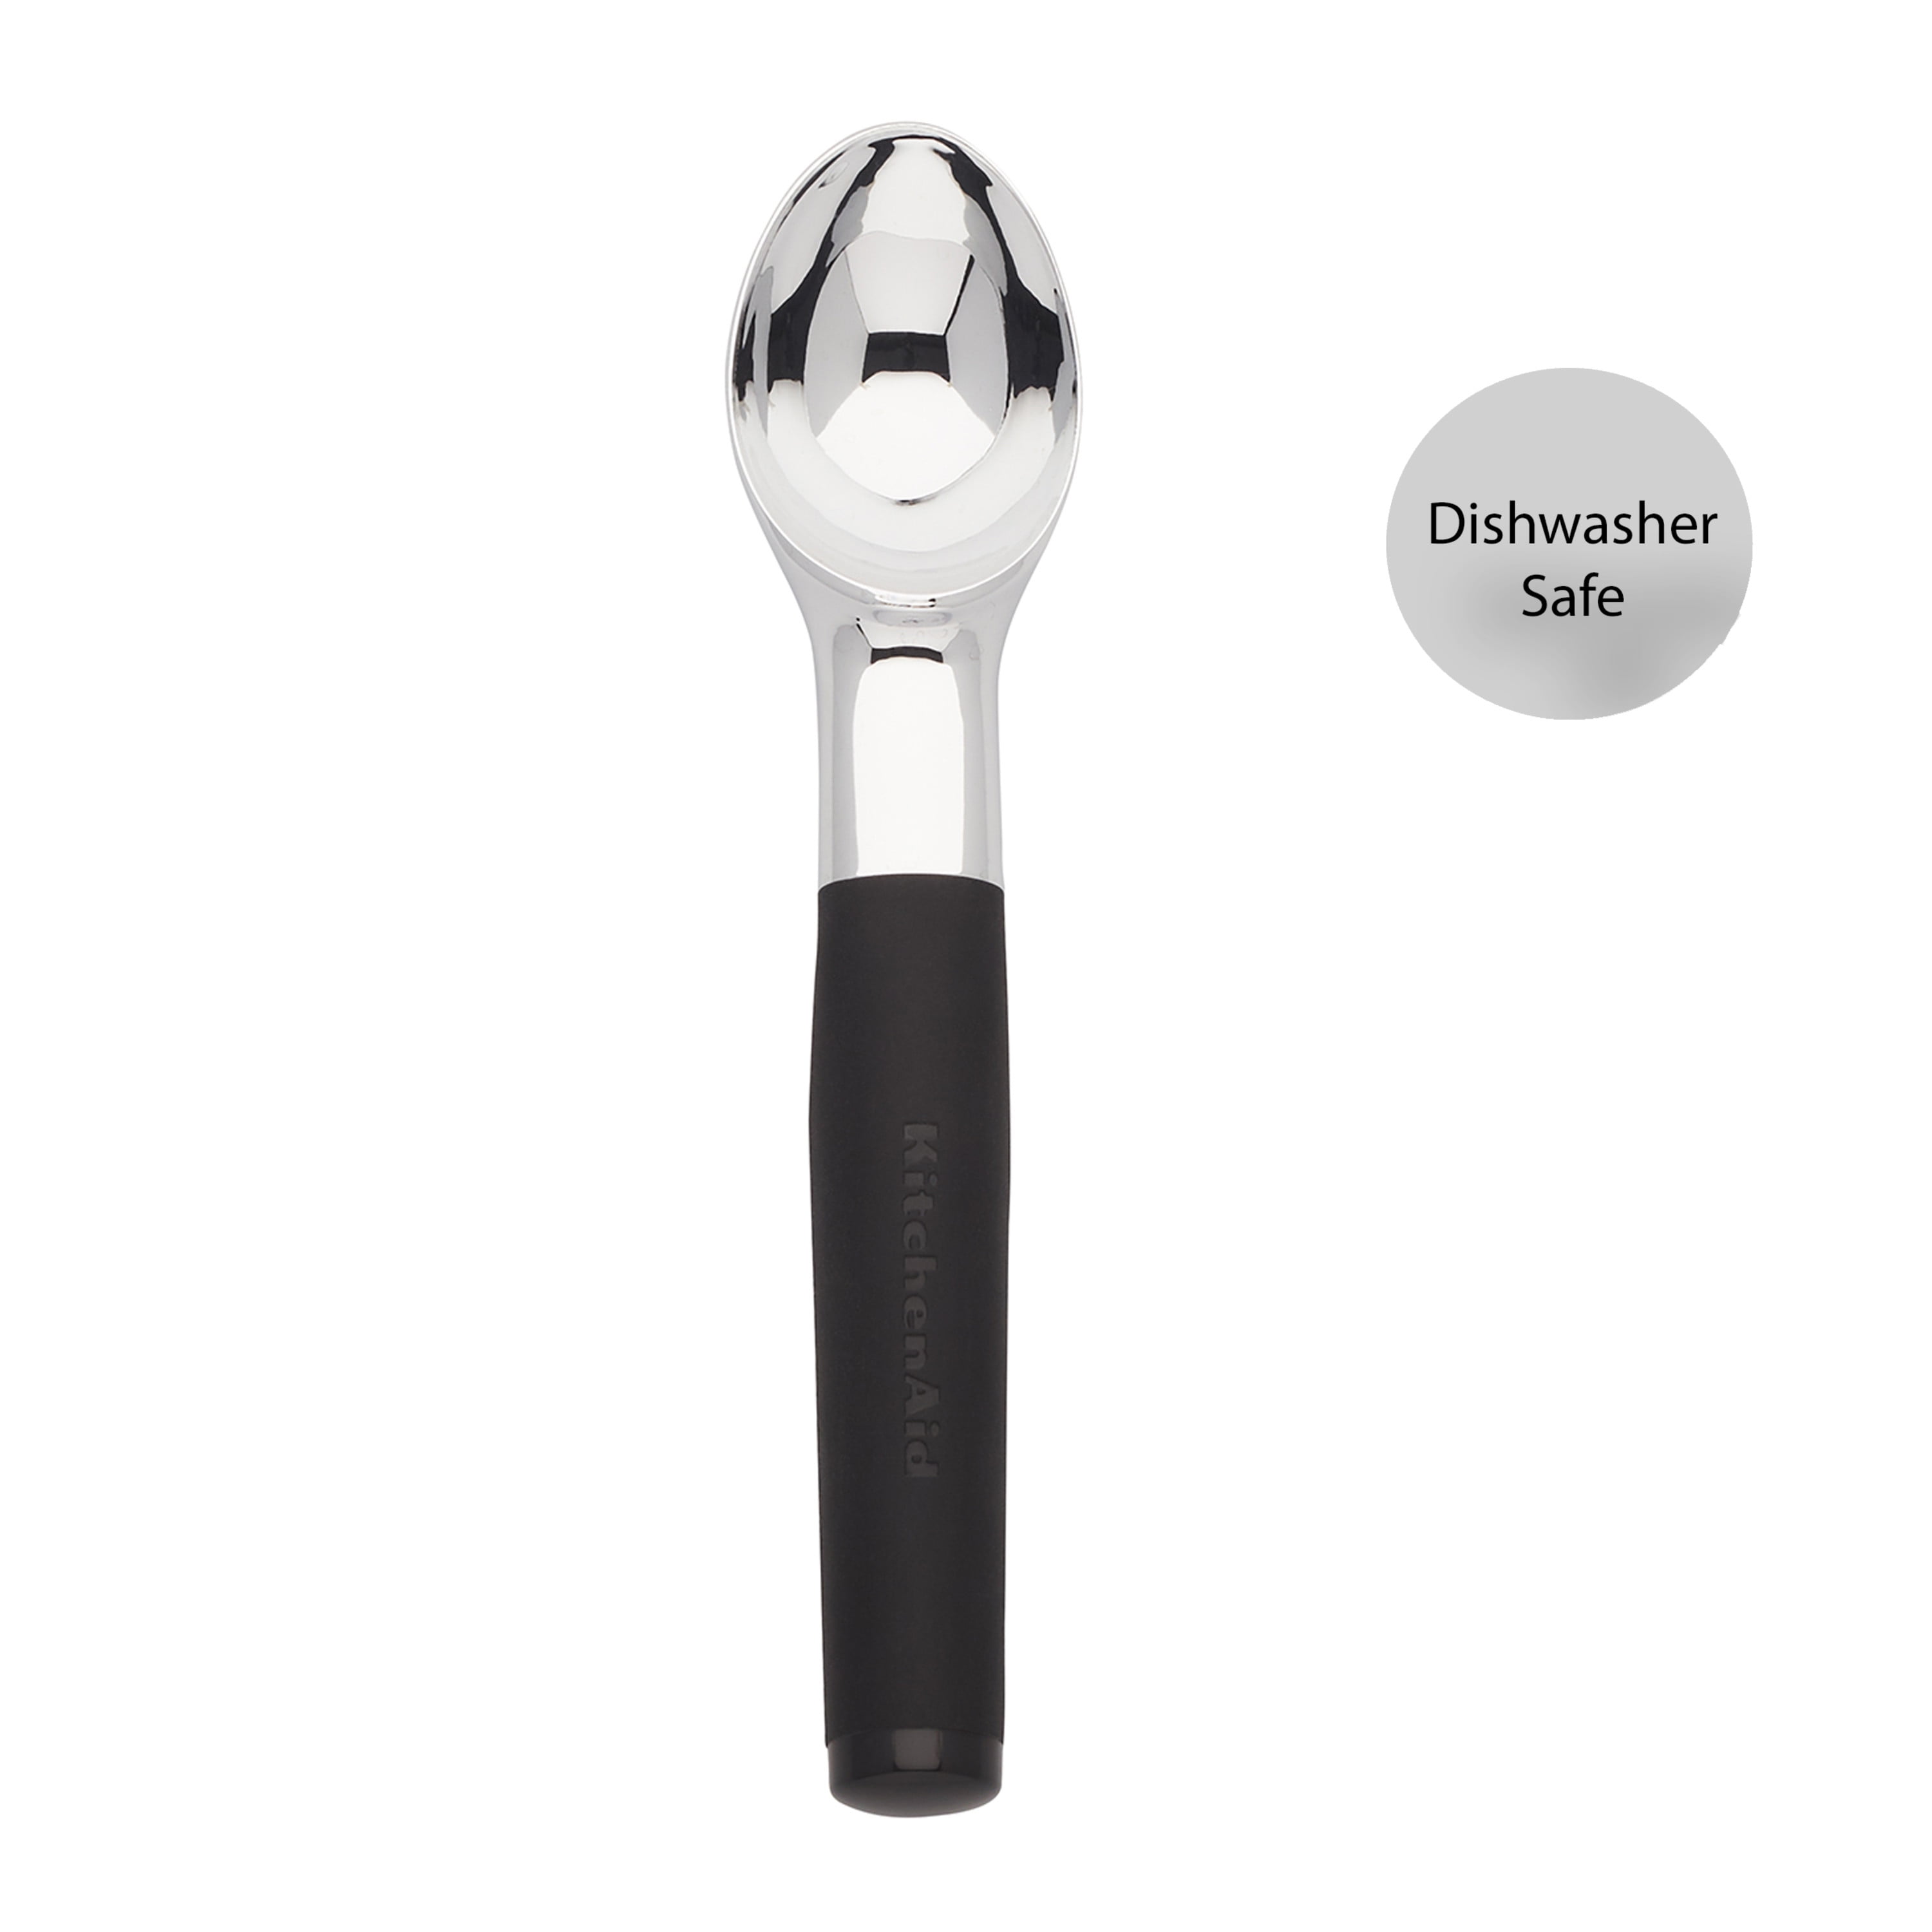 KitchenAid Gourmet Empire Red and Silver Ice Cream Scoop Heavy Utensil